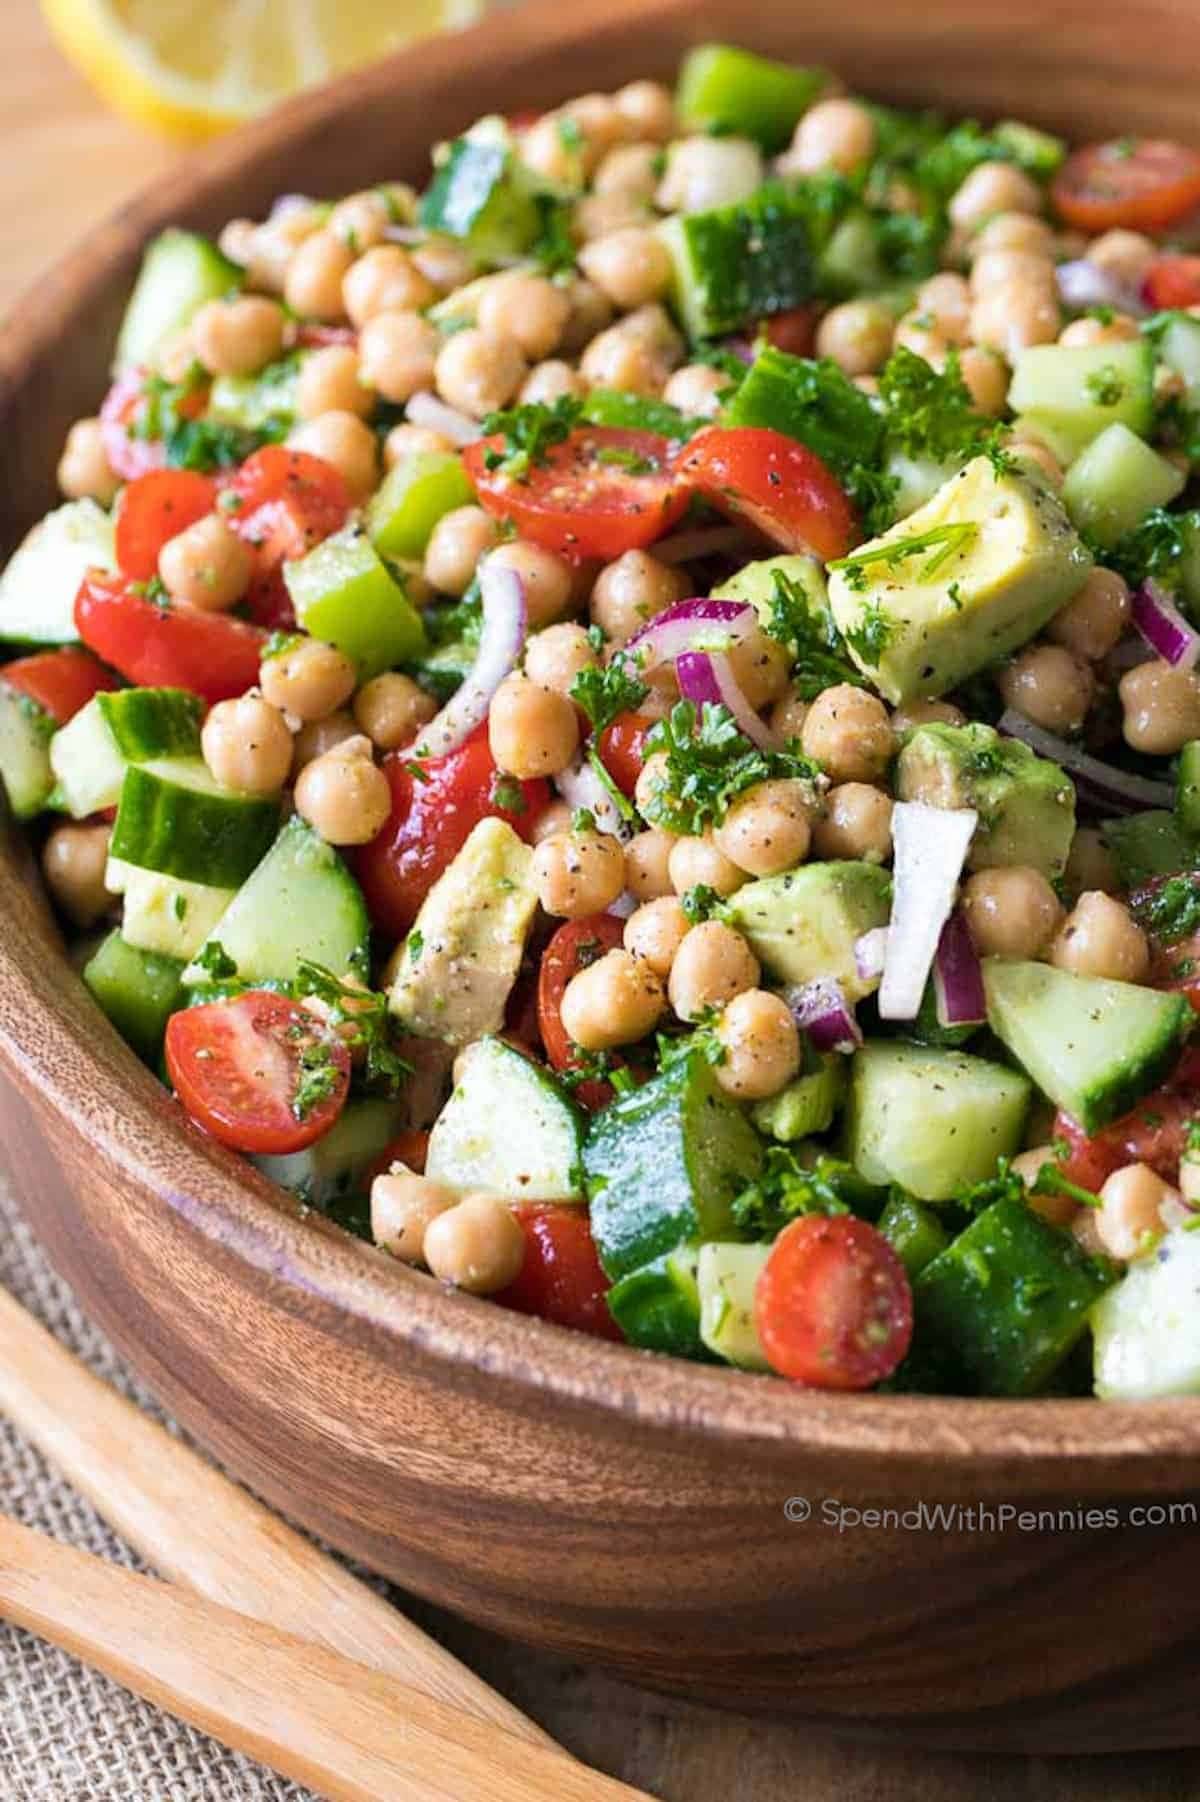 Wooden bowl with chickpea salad made with mix garbanzo beans, cucumber, tomatoes and dressing.